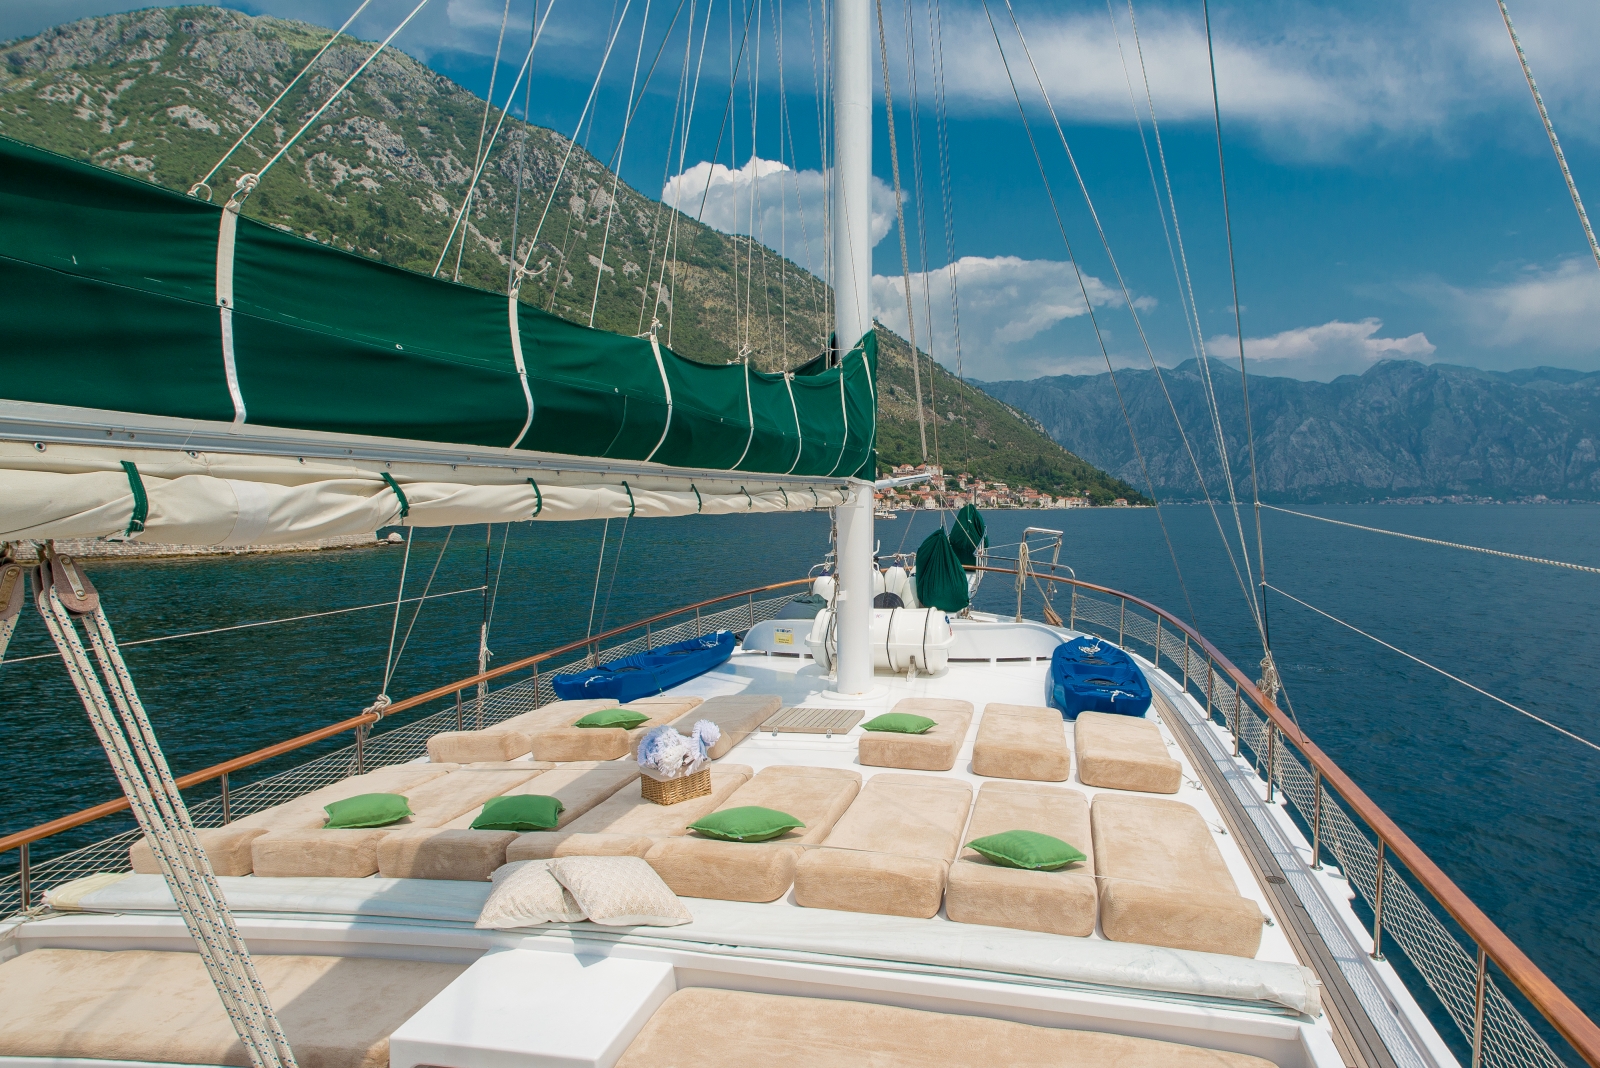 sundeck of luxury gulet Sadri Usta 1 with 14 sunloungers and two canoes